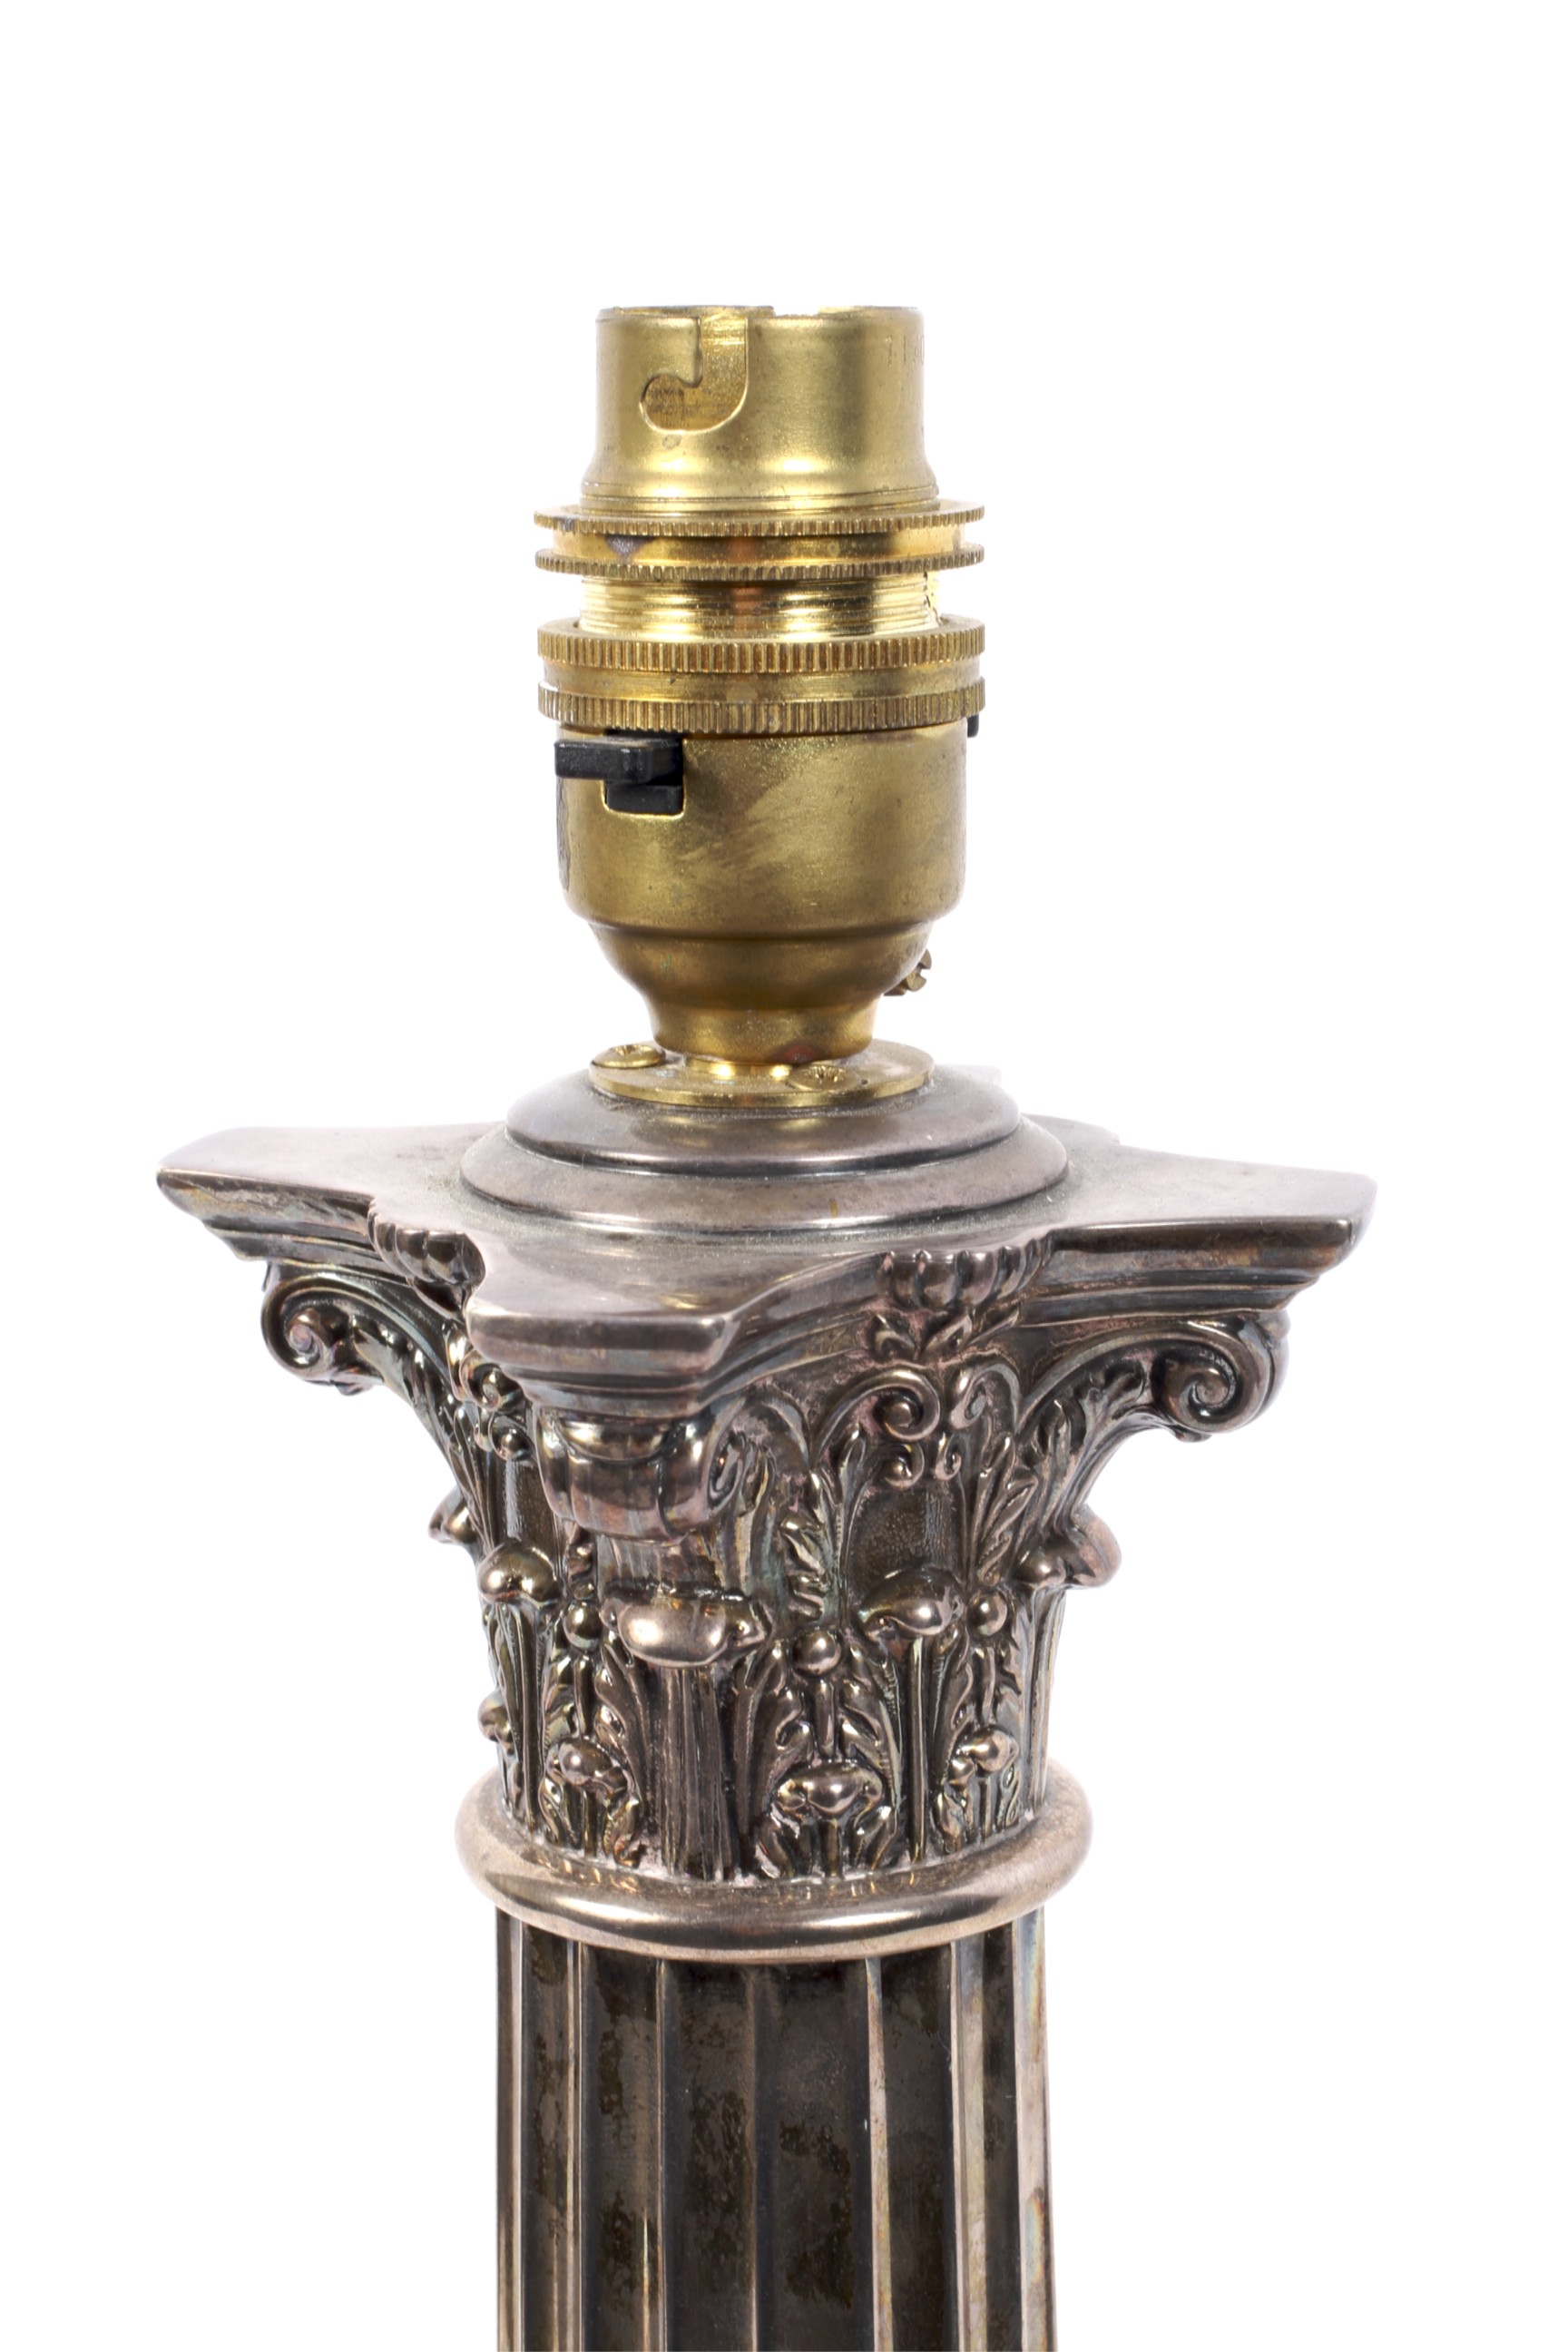 A Victorian silver Corinthian column candletick later adapted into a table lamp base. - Image 2 of 4